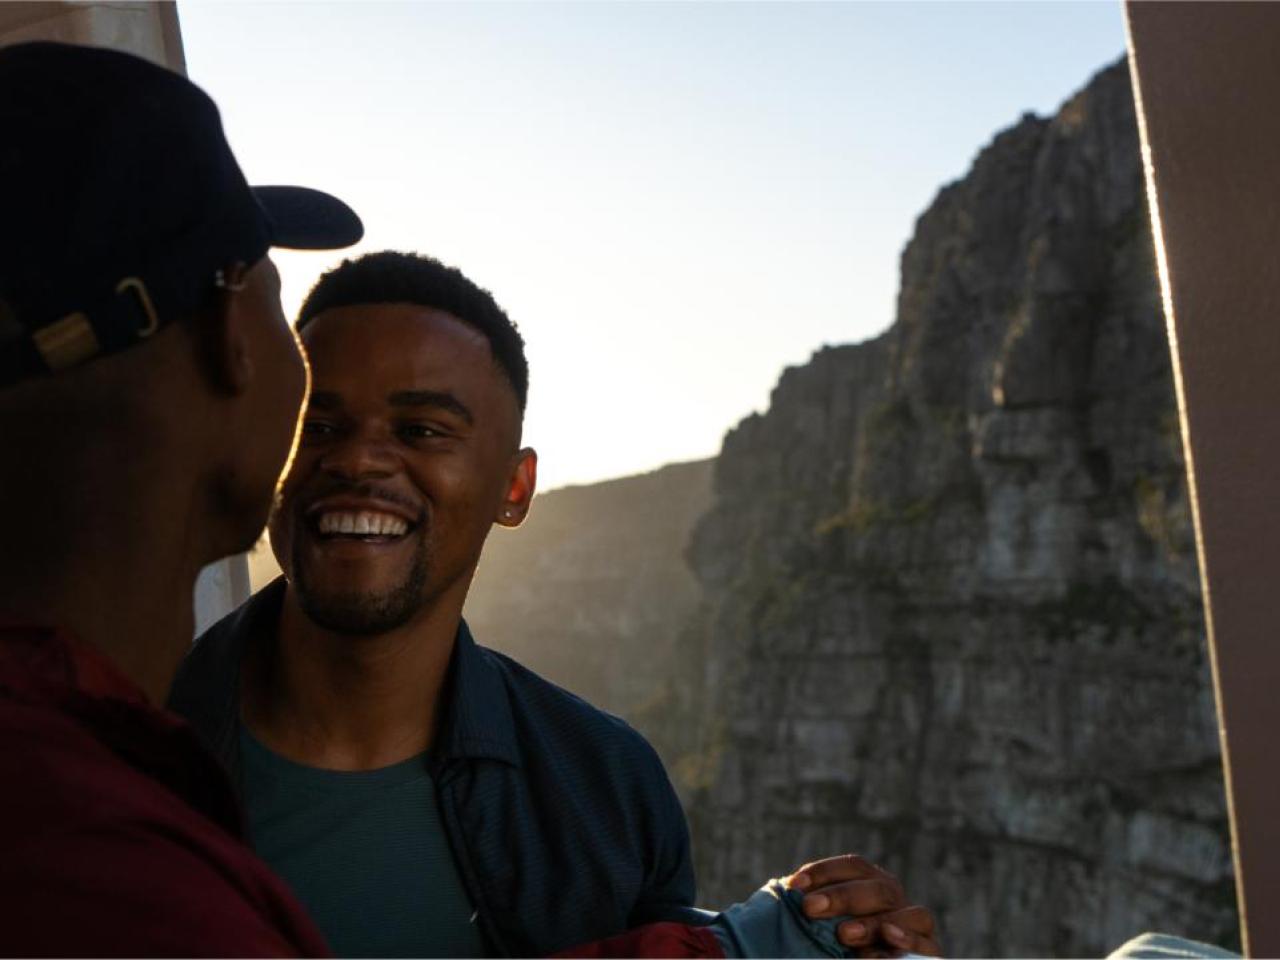 Two people looking at each other. A rocky landscape behind them.